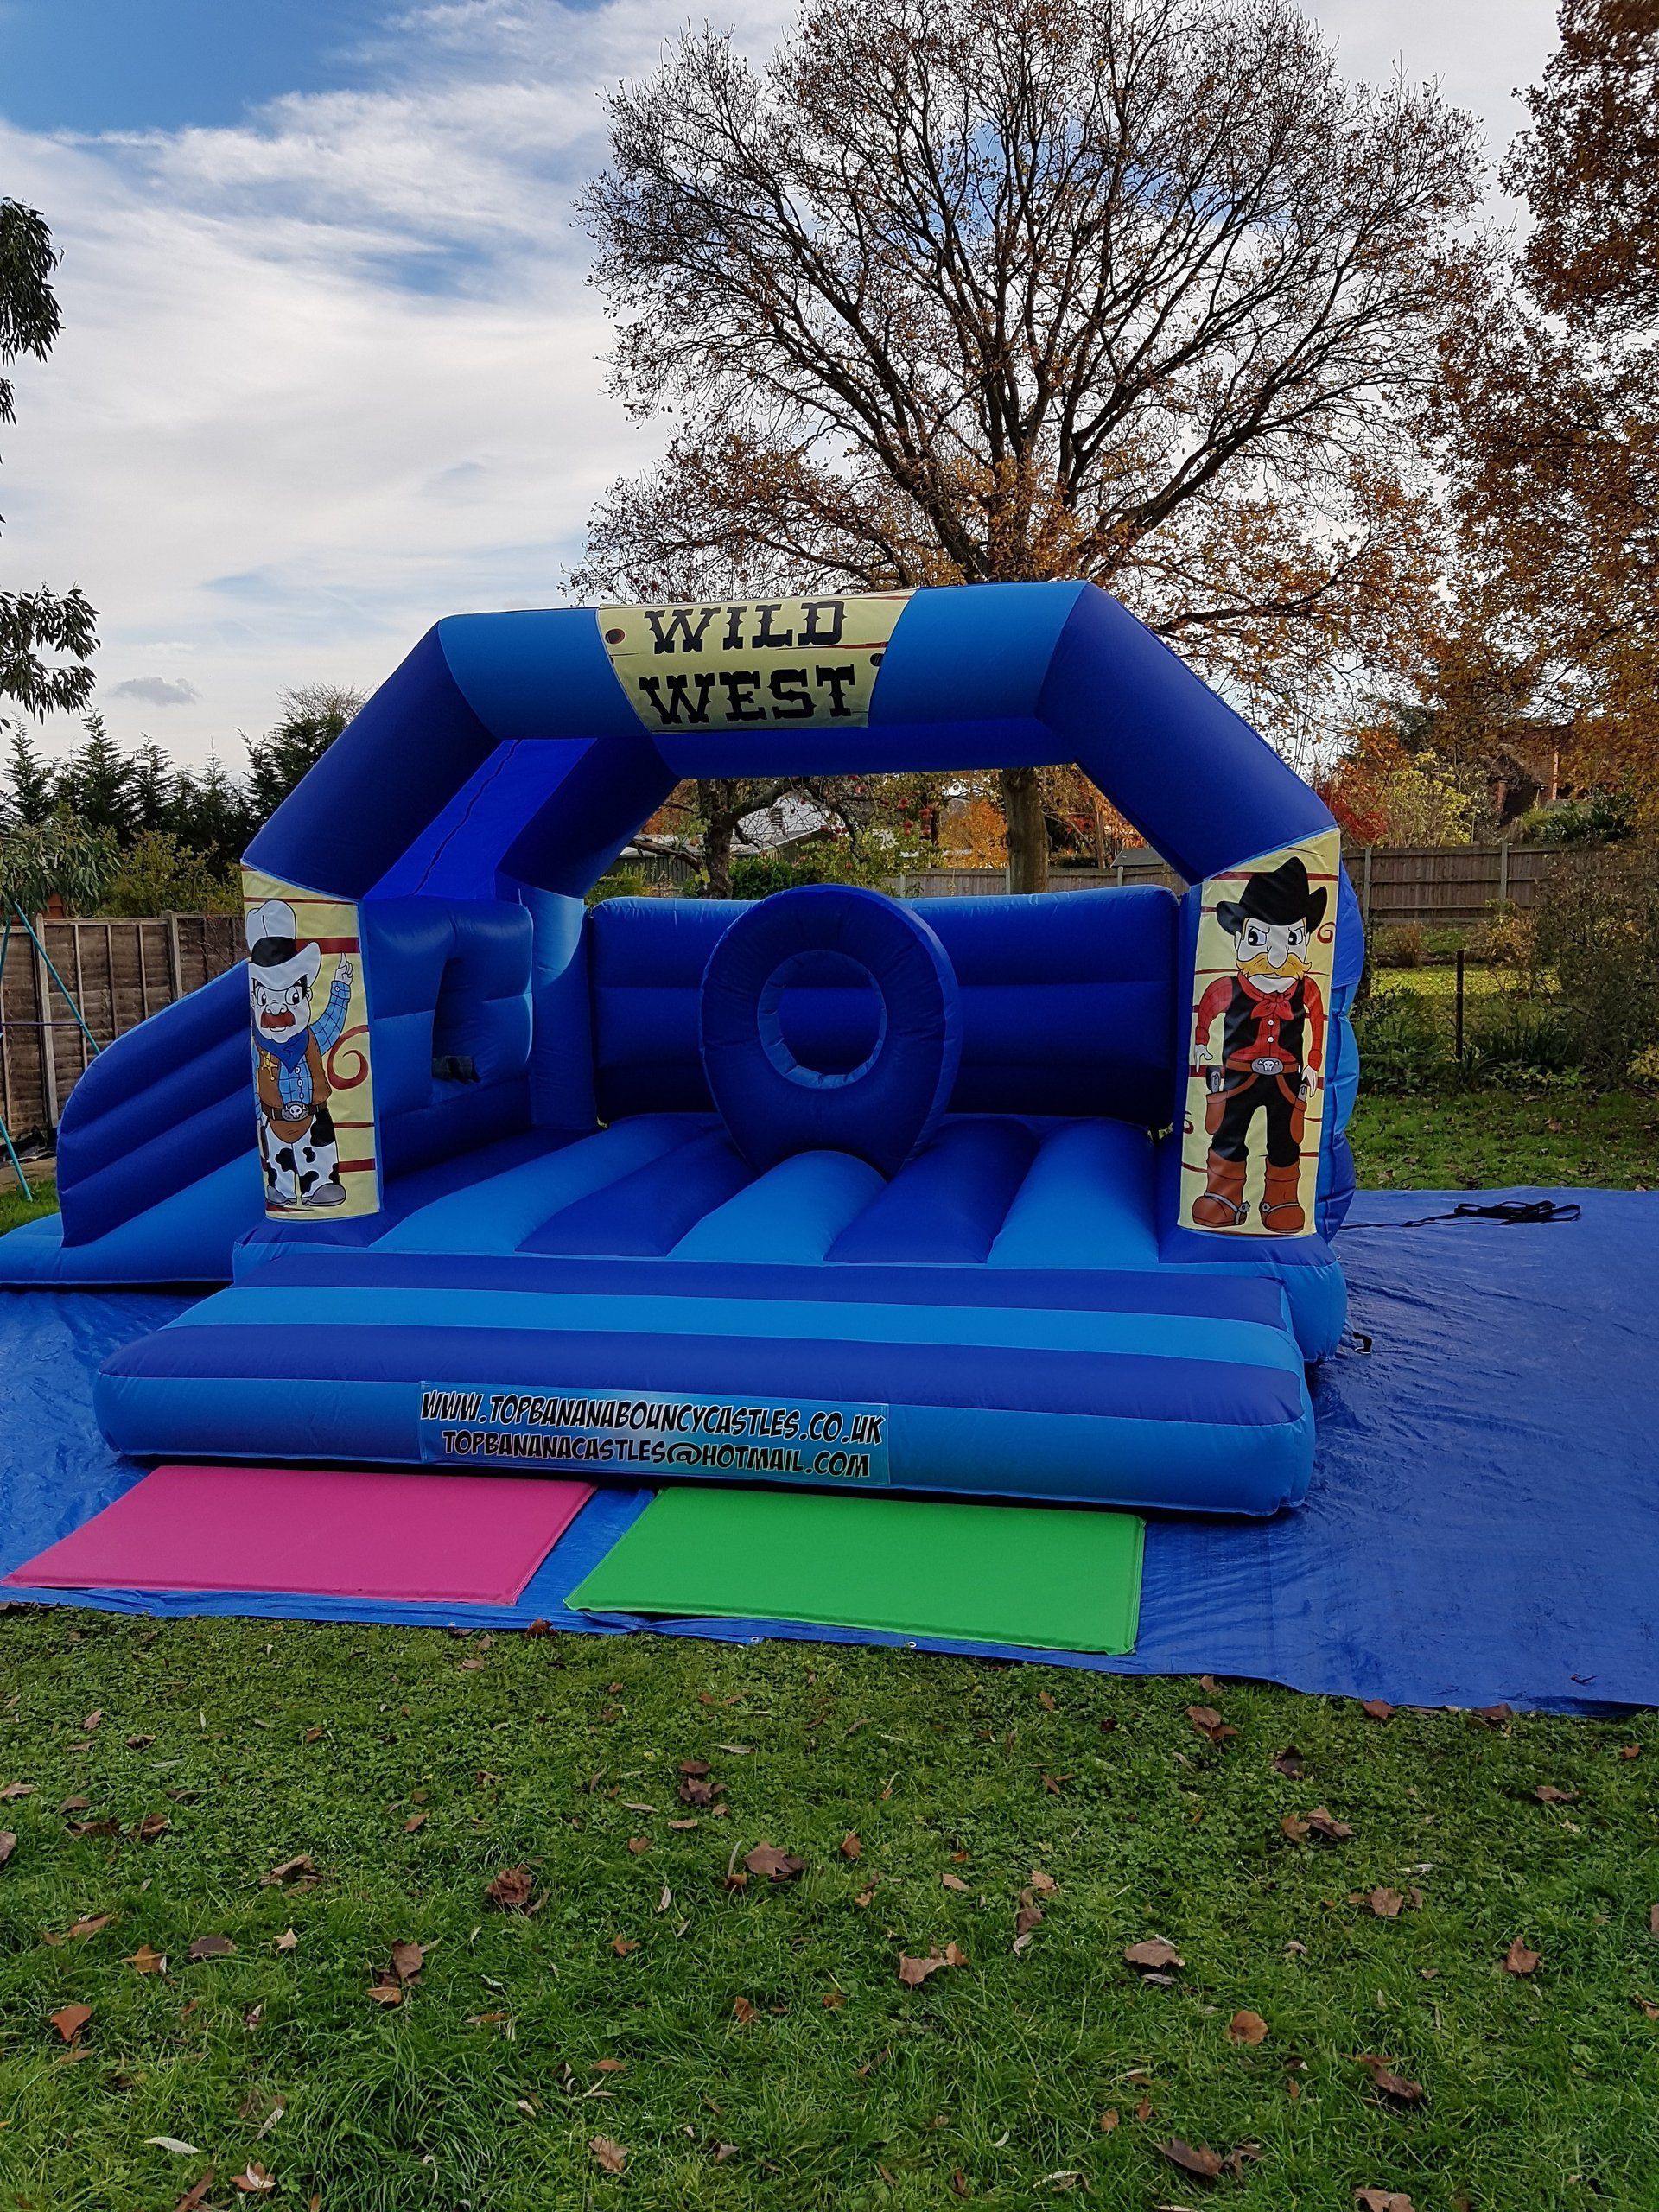 large bouncy castle with wild west artwork